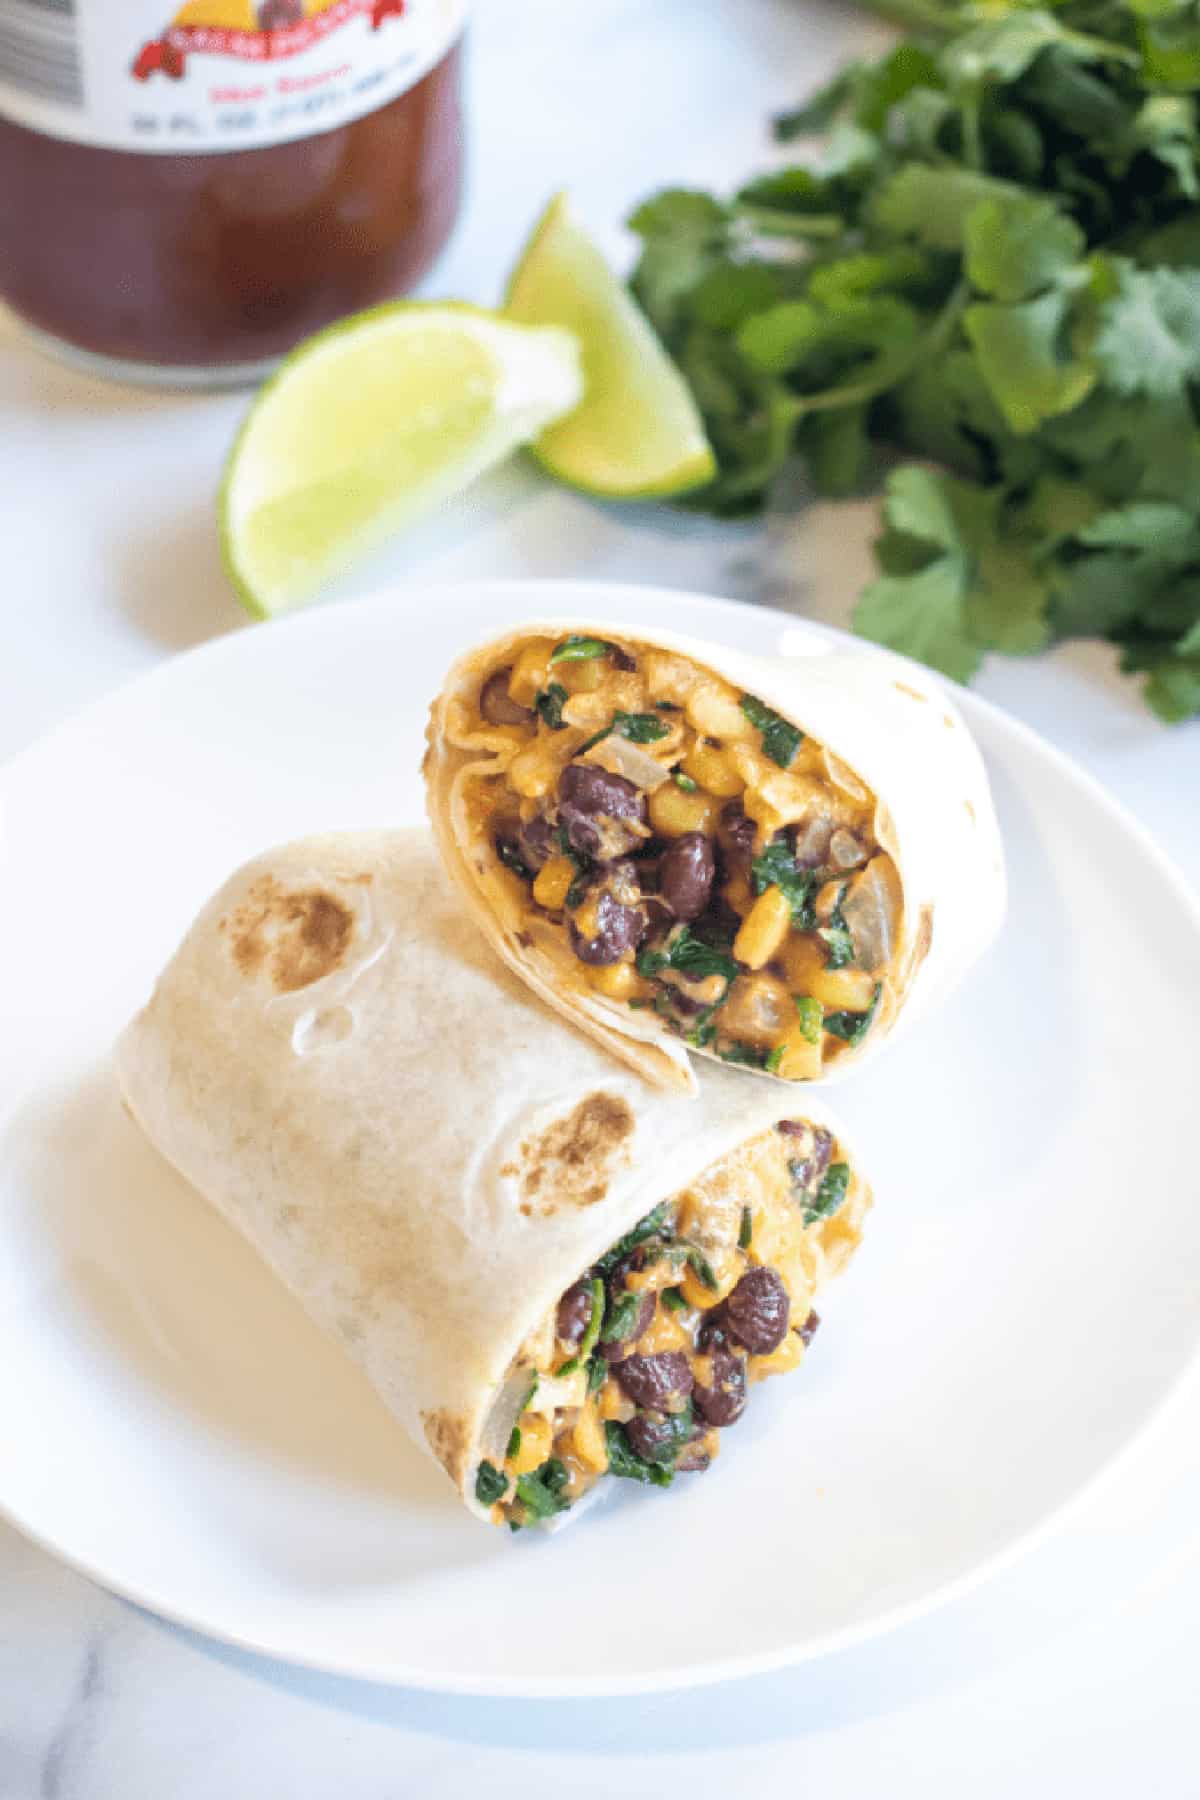 a half of a burrito on a plate with beans, corn, and spinach.